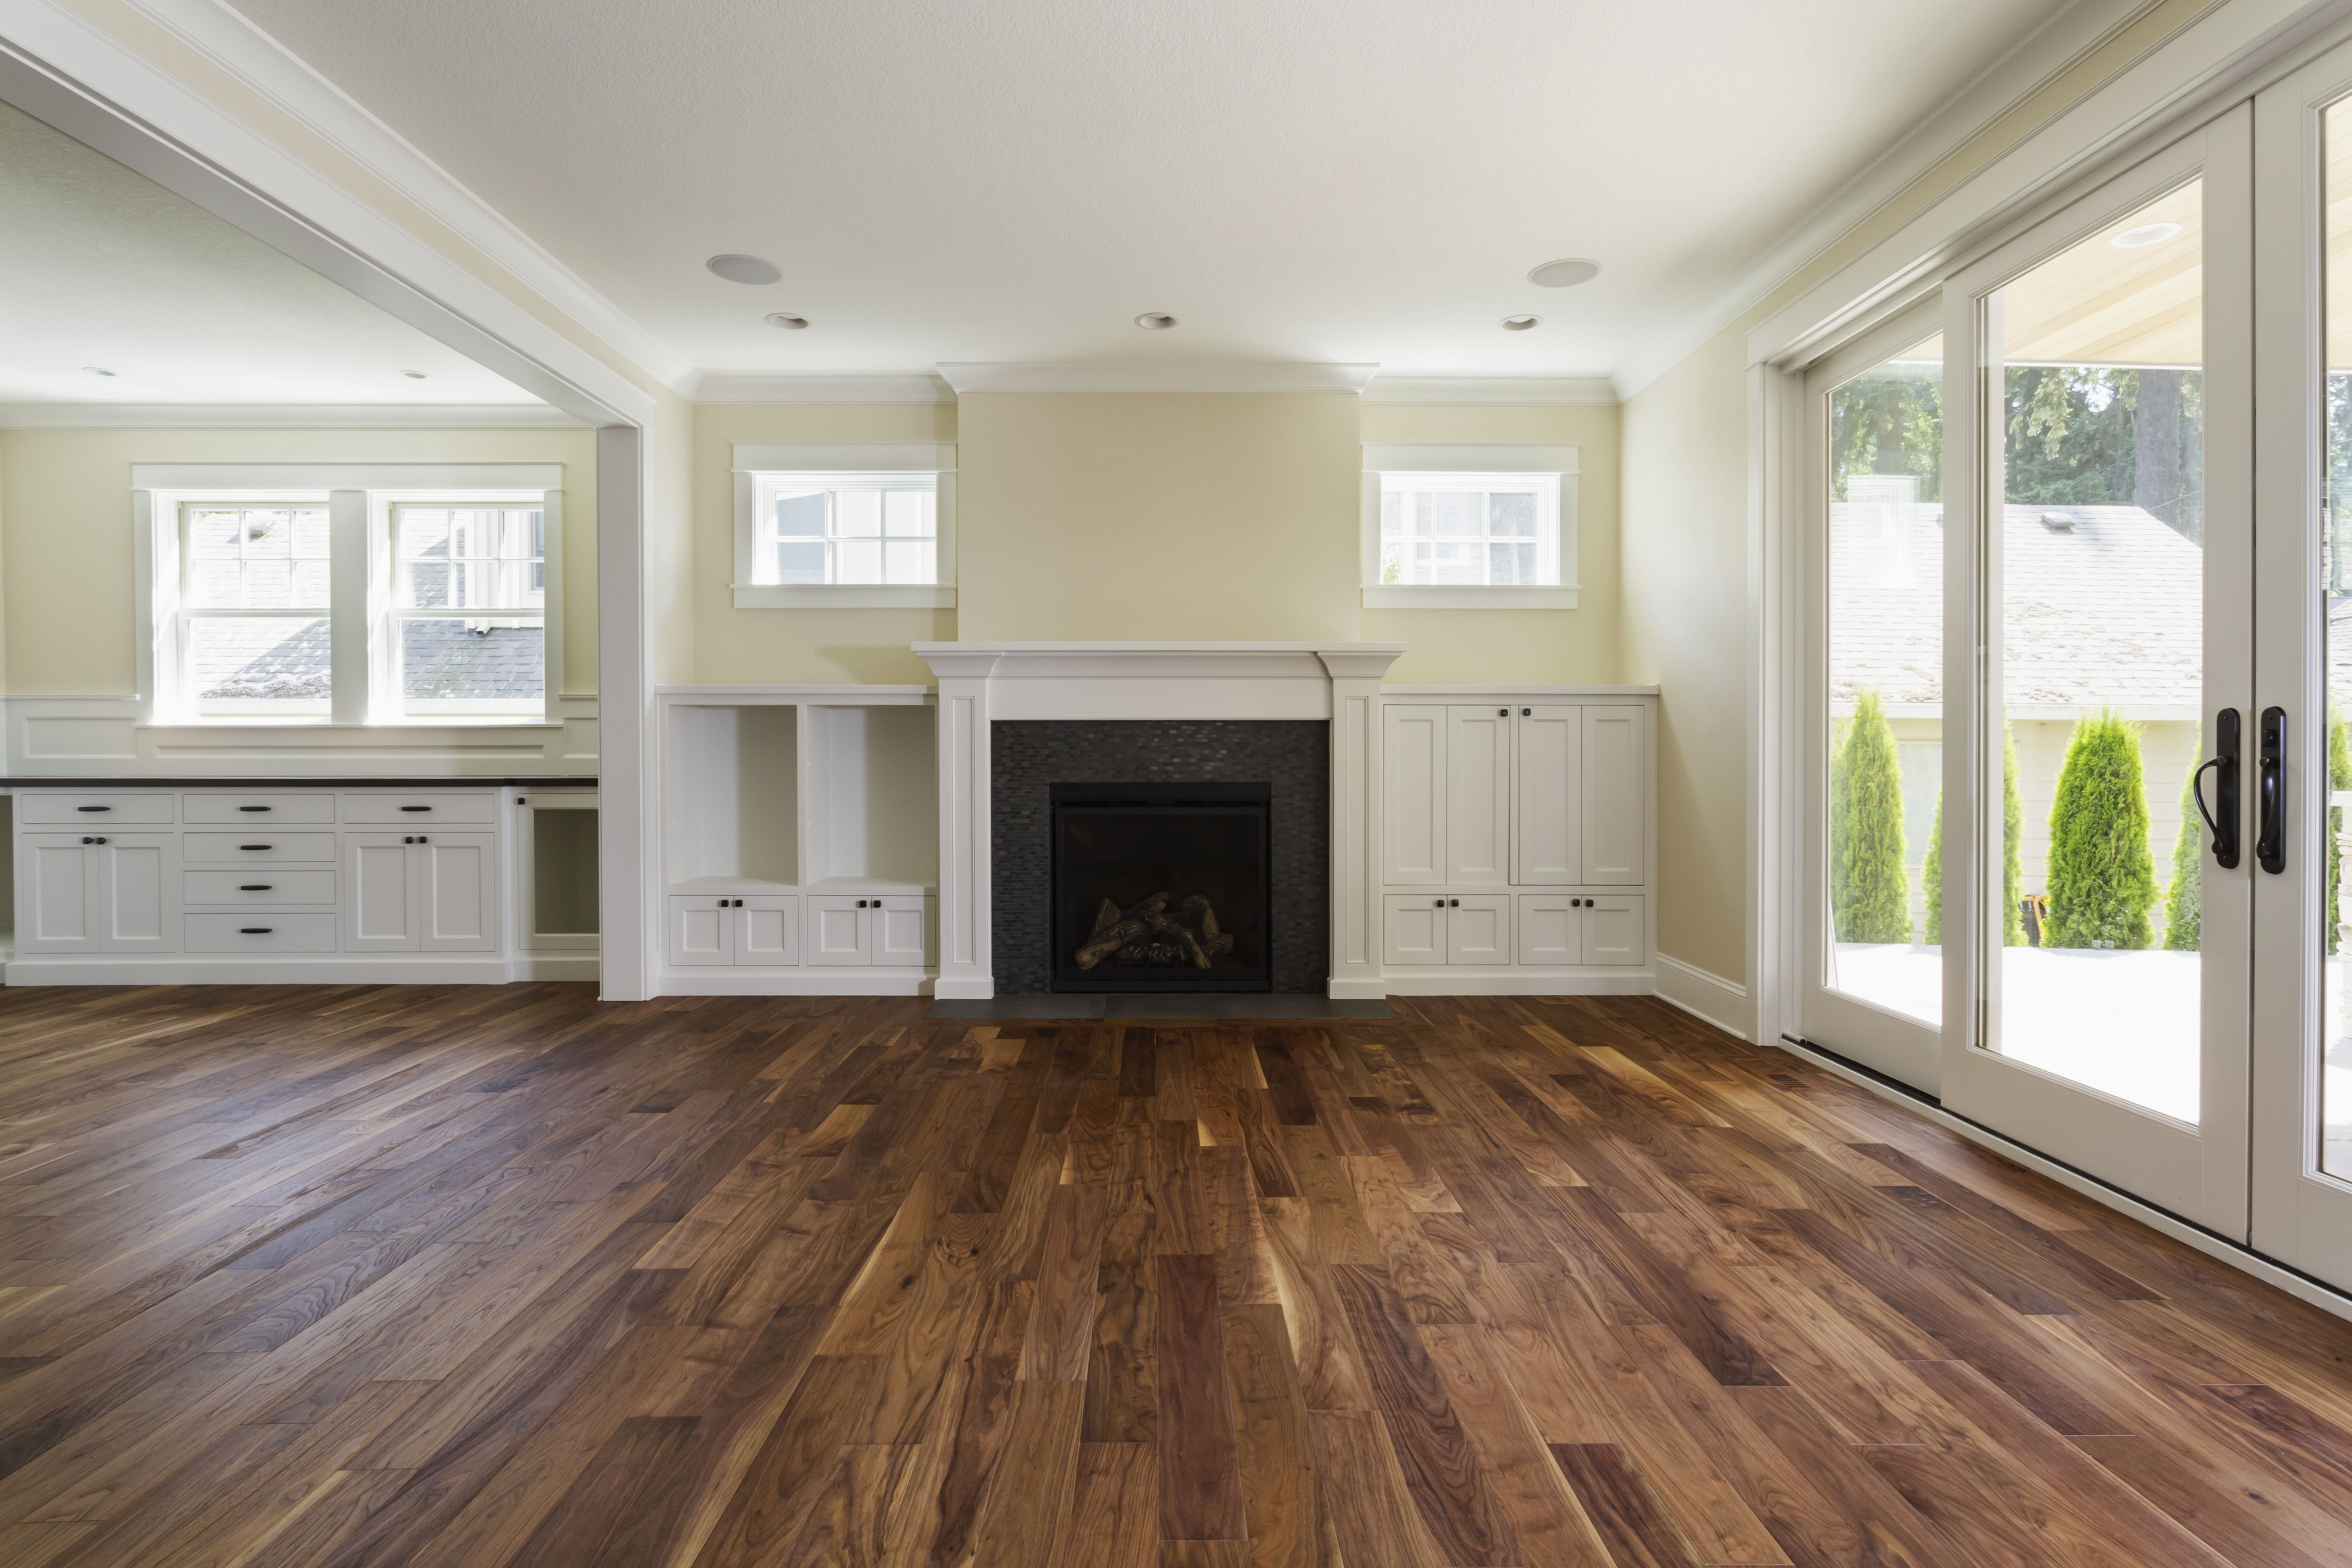 26 Best Birch Hardwood Flooring Reviews 2024 free download birch hardwood flooring reviews of the pros and cons of prefinished hardwood flooring in fireplace and built in shelves in living room 482143011 57bef8e33df78cc16e035397